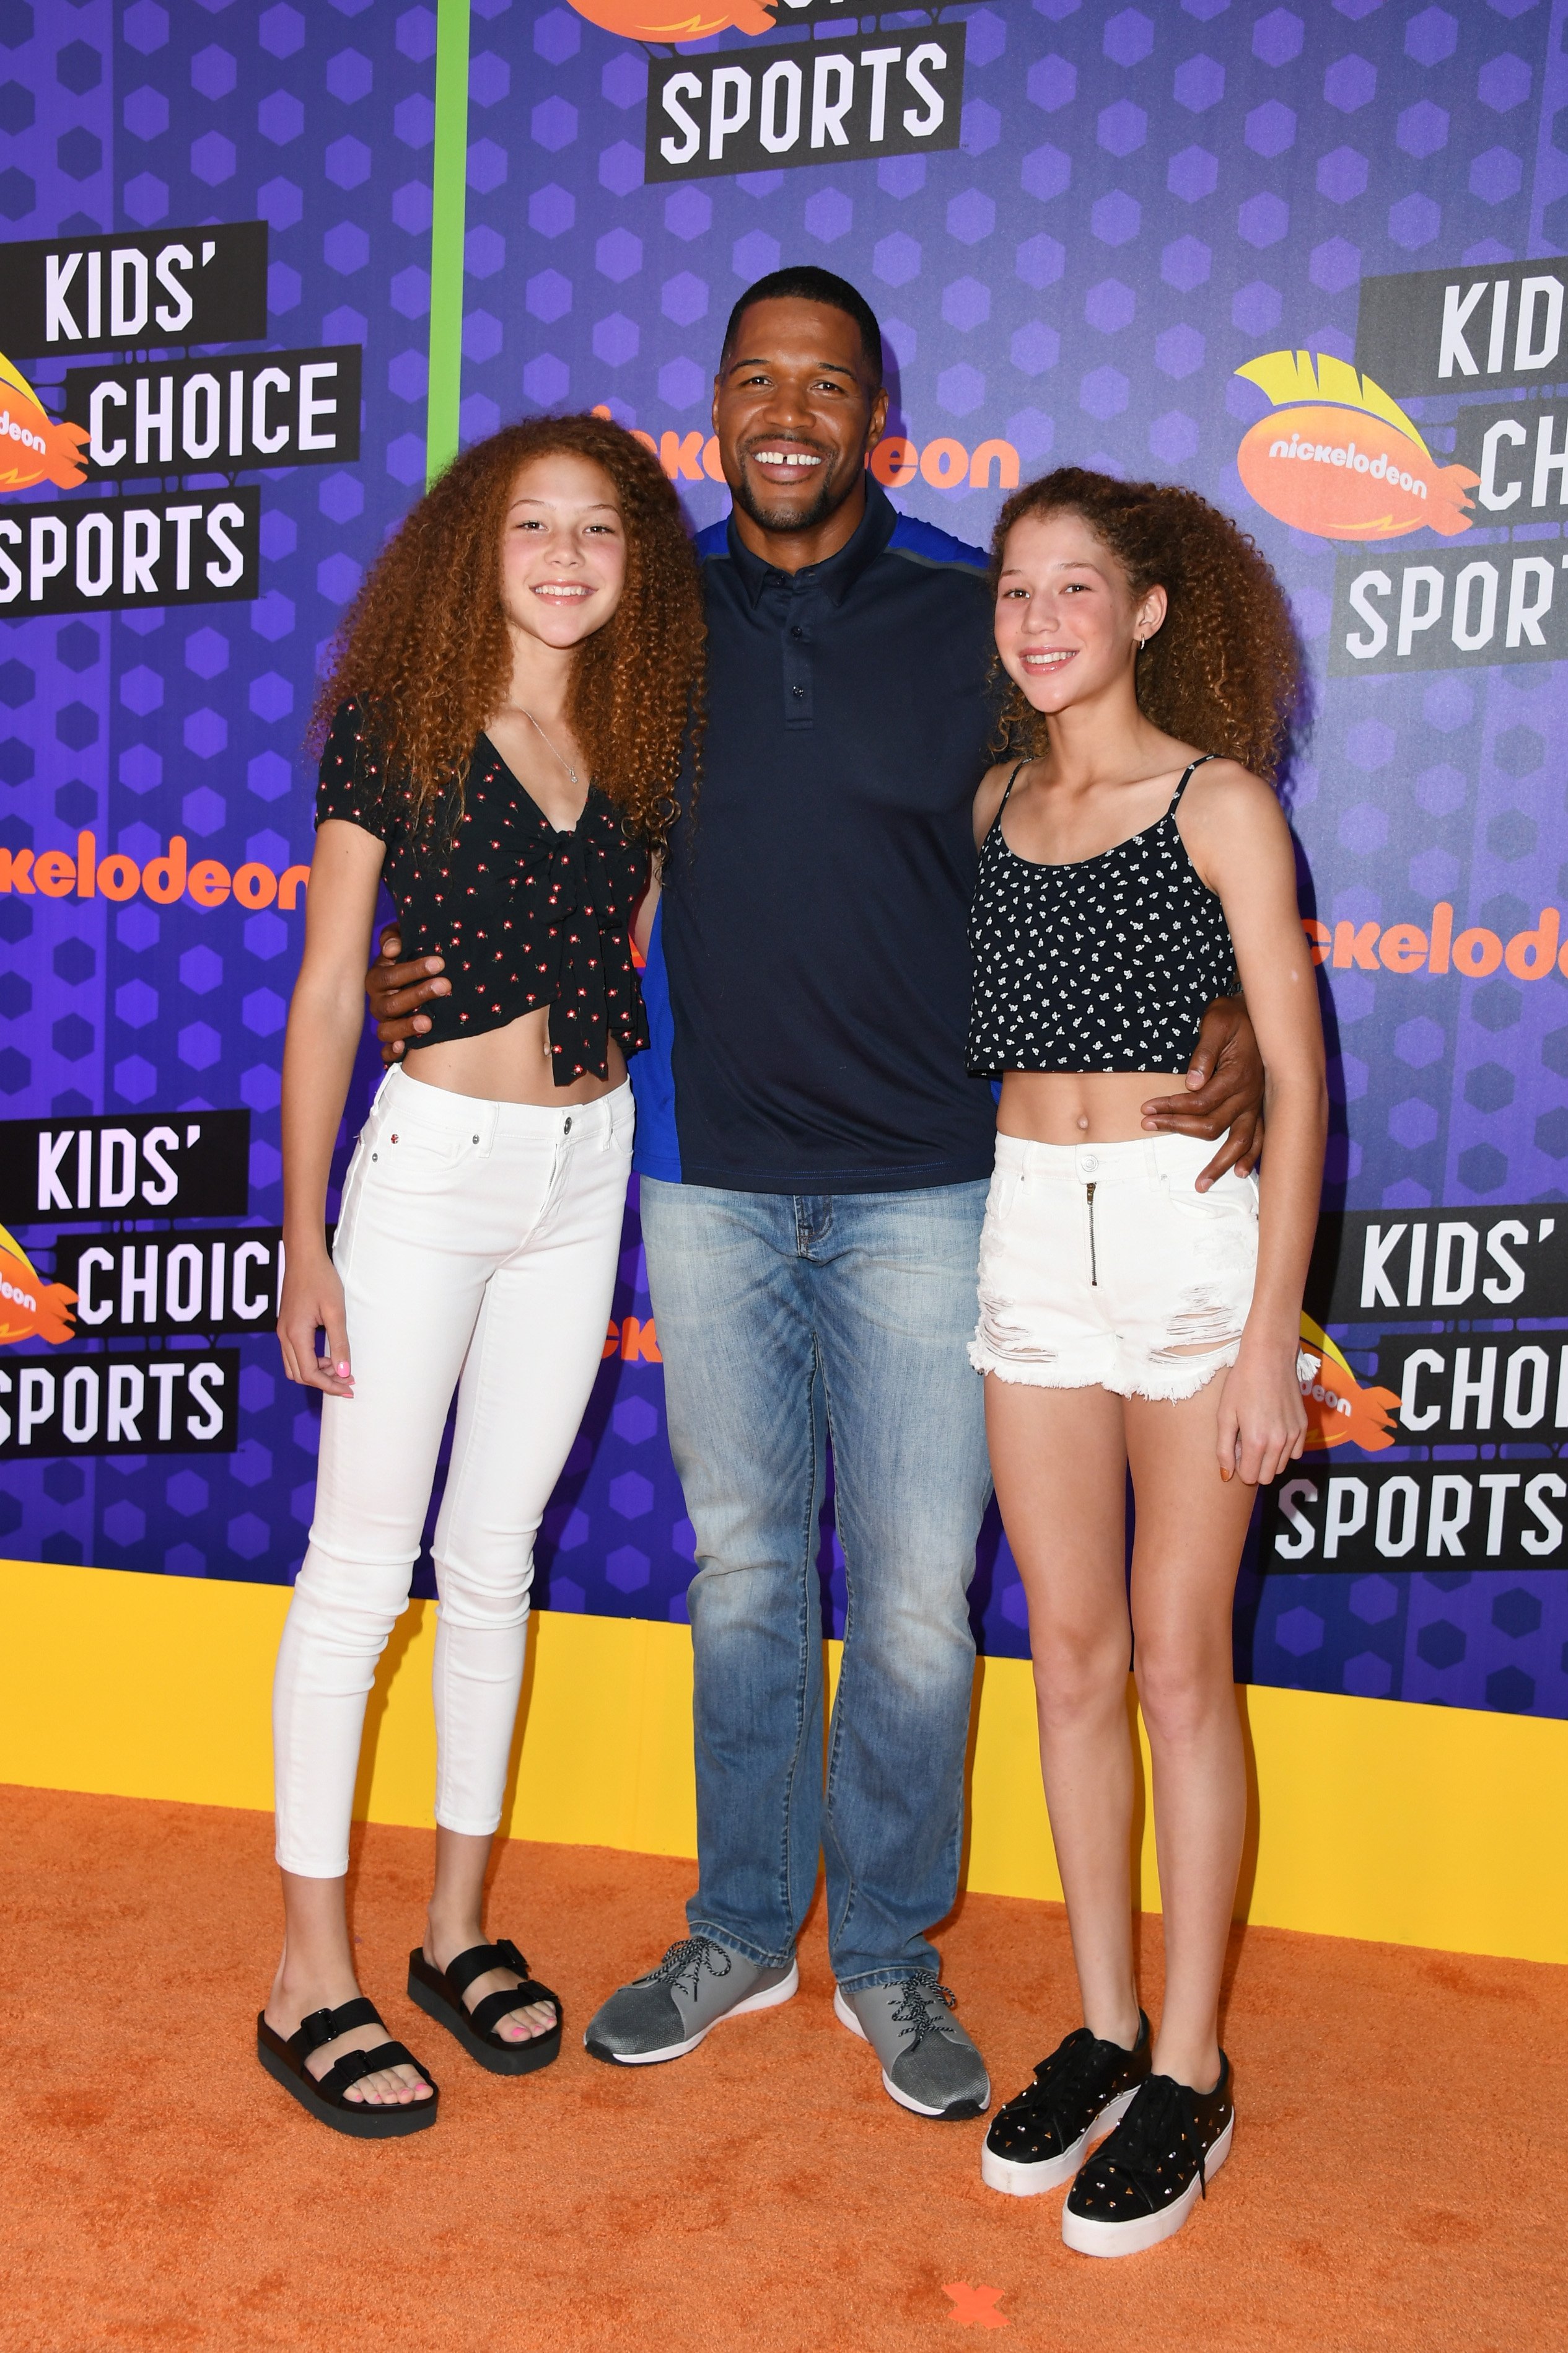 Michael Strahan and his twin daughters Isabella Strahan and Sophia Strahan at the Nickelodeon Kids' Choice Sports 2018 in Santa Monica, California | Photo: Getty Images 